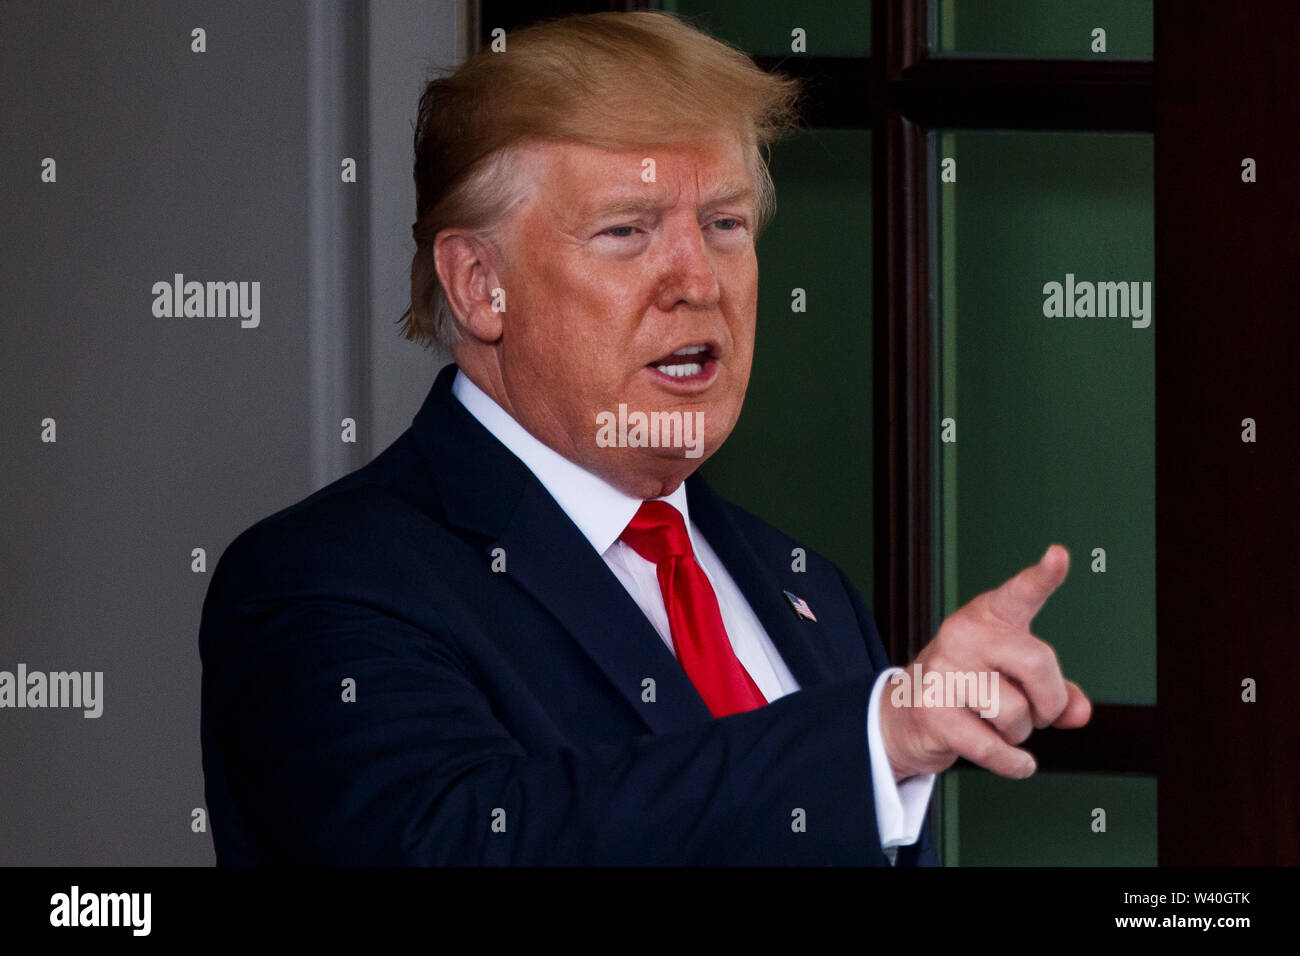 Washington, USA. 18th July, 2019. U.S. President Donald Trump speaks to the media at the White House in Washington, DC, the United States, on July 18, 2019. Donald Trump announced on Thursday that a U.S. warship destroyed an Iranian drone in the Strait of Hormuz. Speaking at the White House, Trump said that USS Boxer, an amphibious assault ship of the U.S. Navy, destroyed the drone that threatened the U.S. warship by flying within 1,000 yards of it. Credit: Ting Shen/Xinhua/Alamy Live News Stock Photo